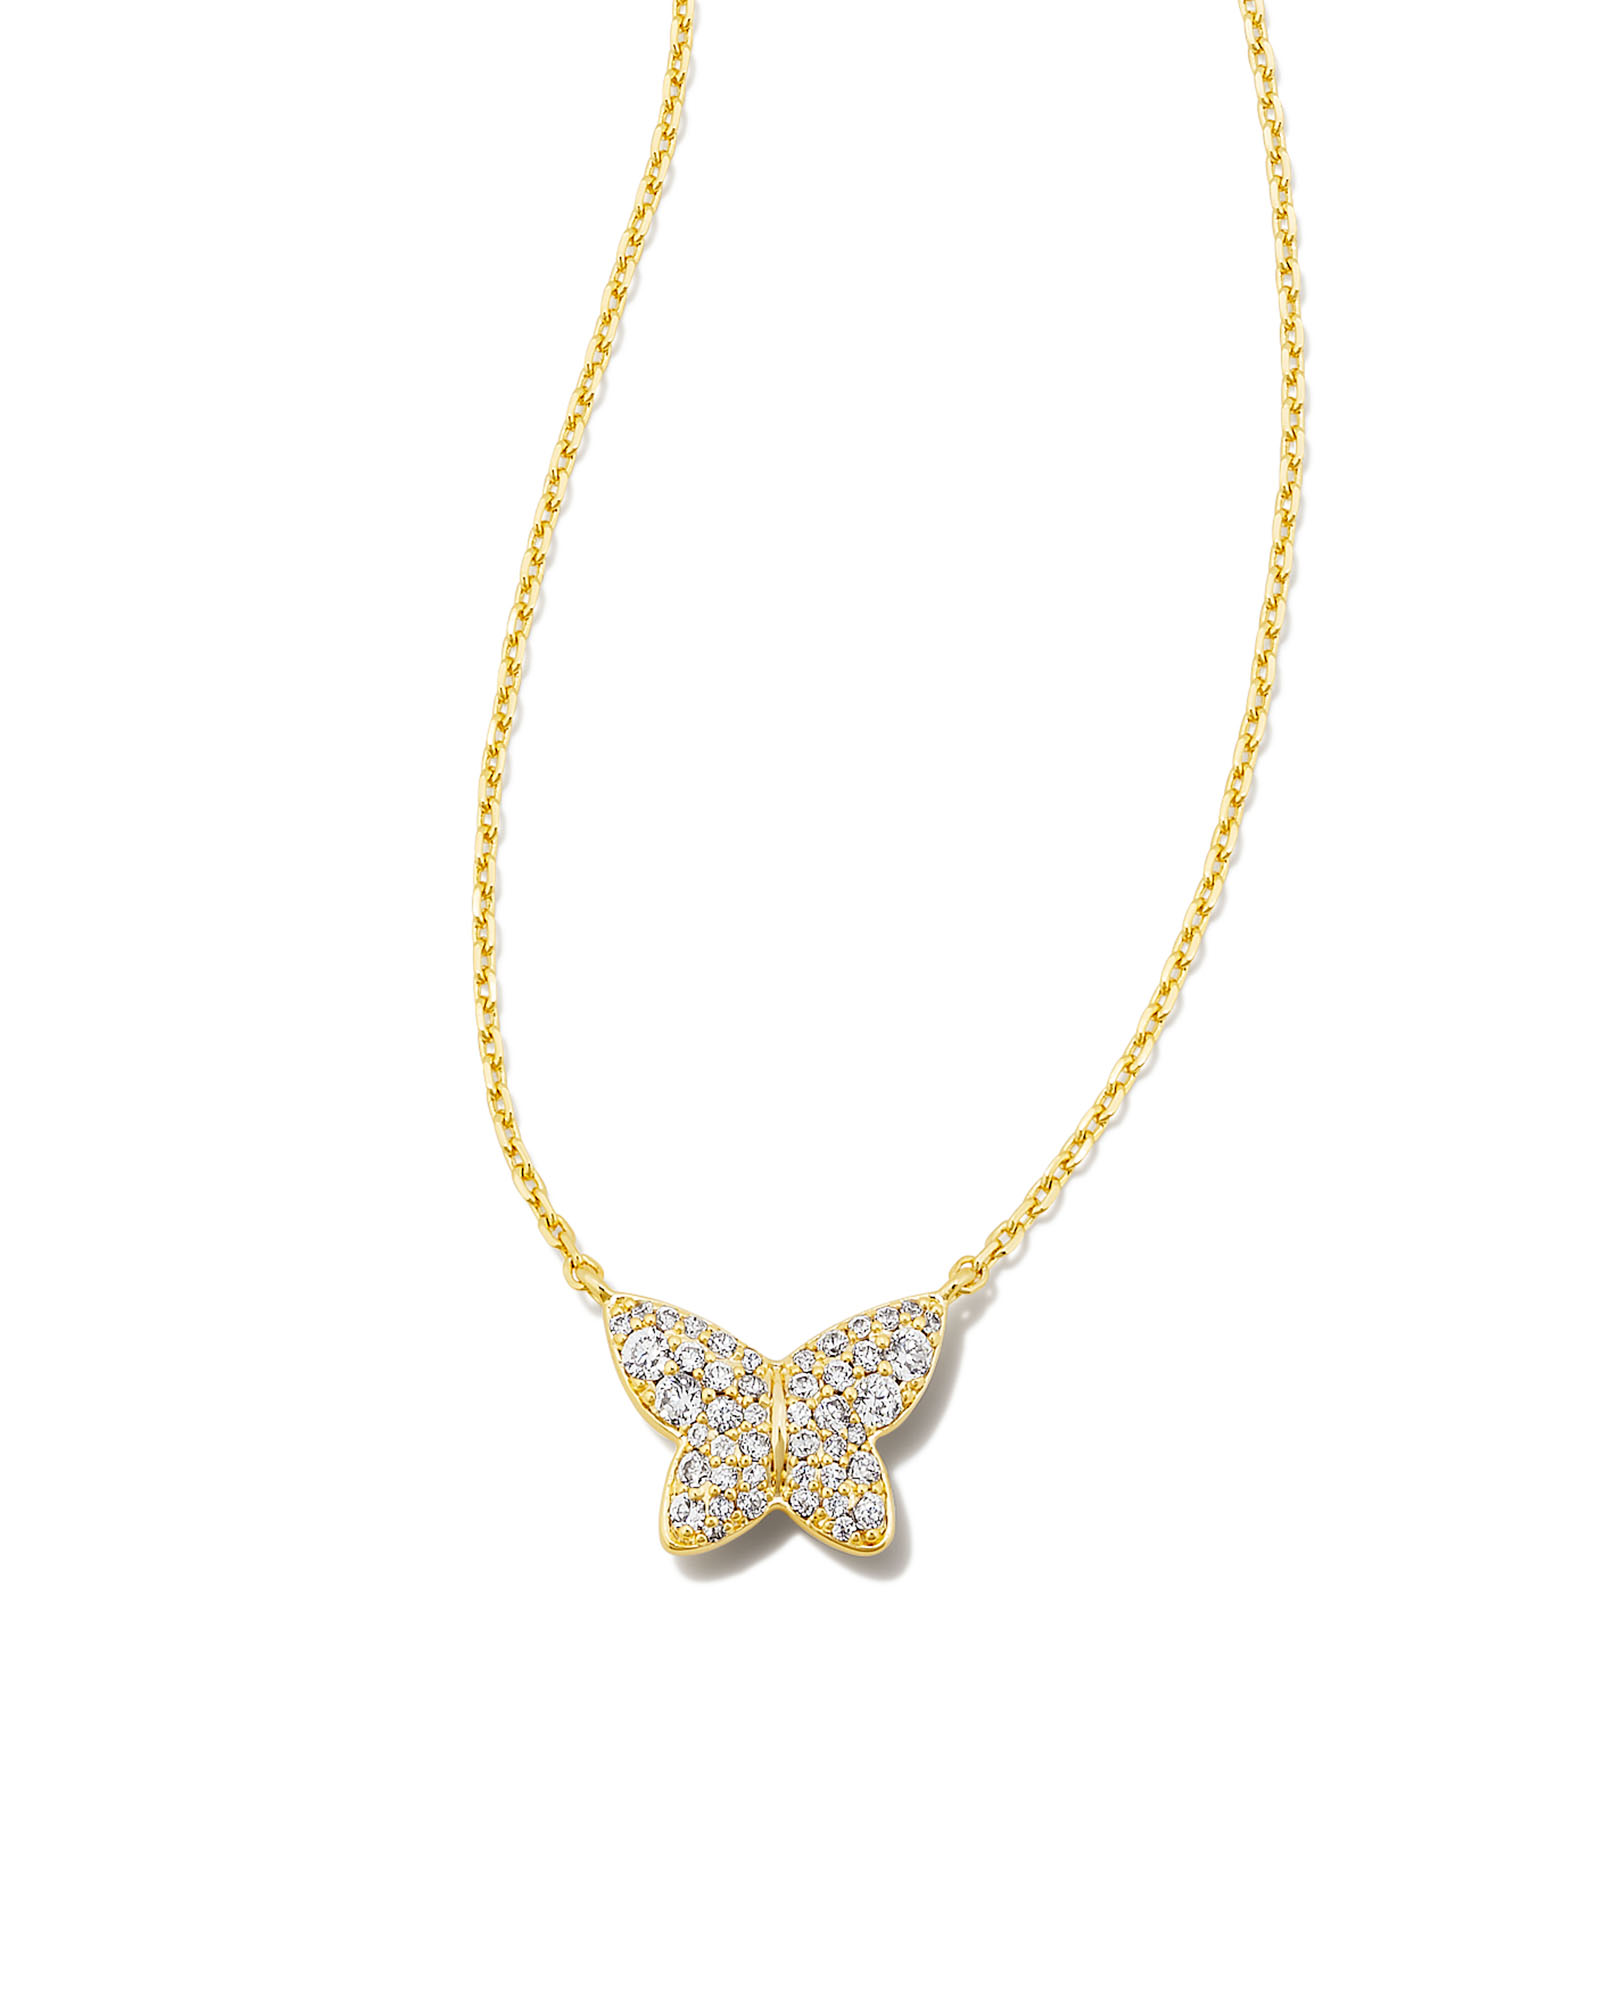 Kendra Scott Necklaces – The In